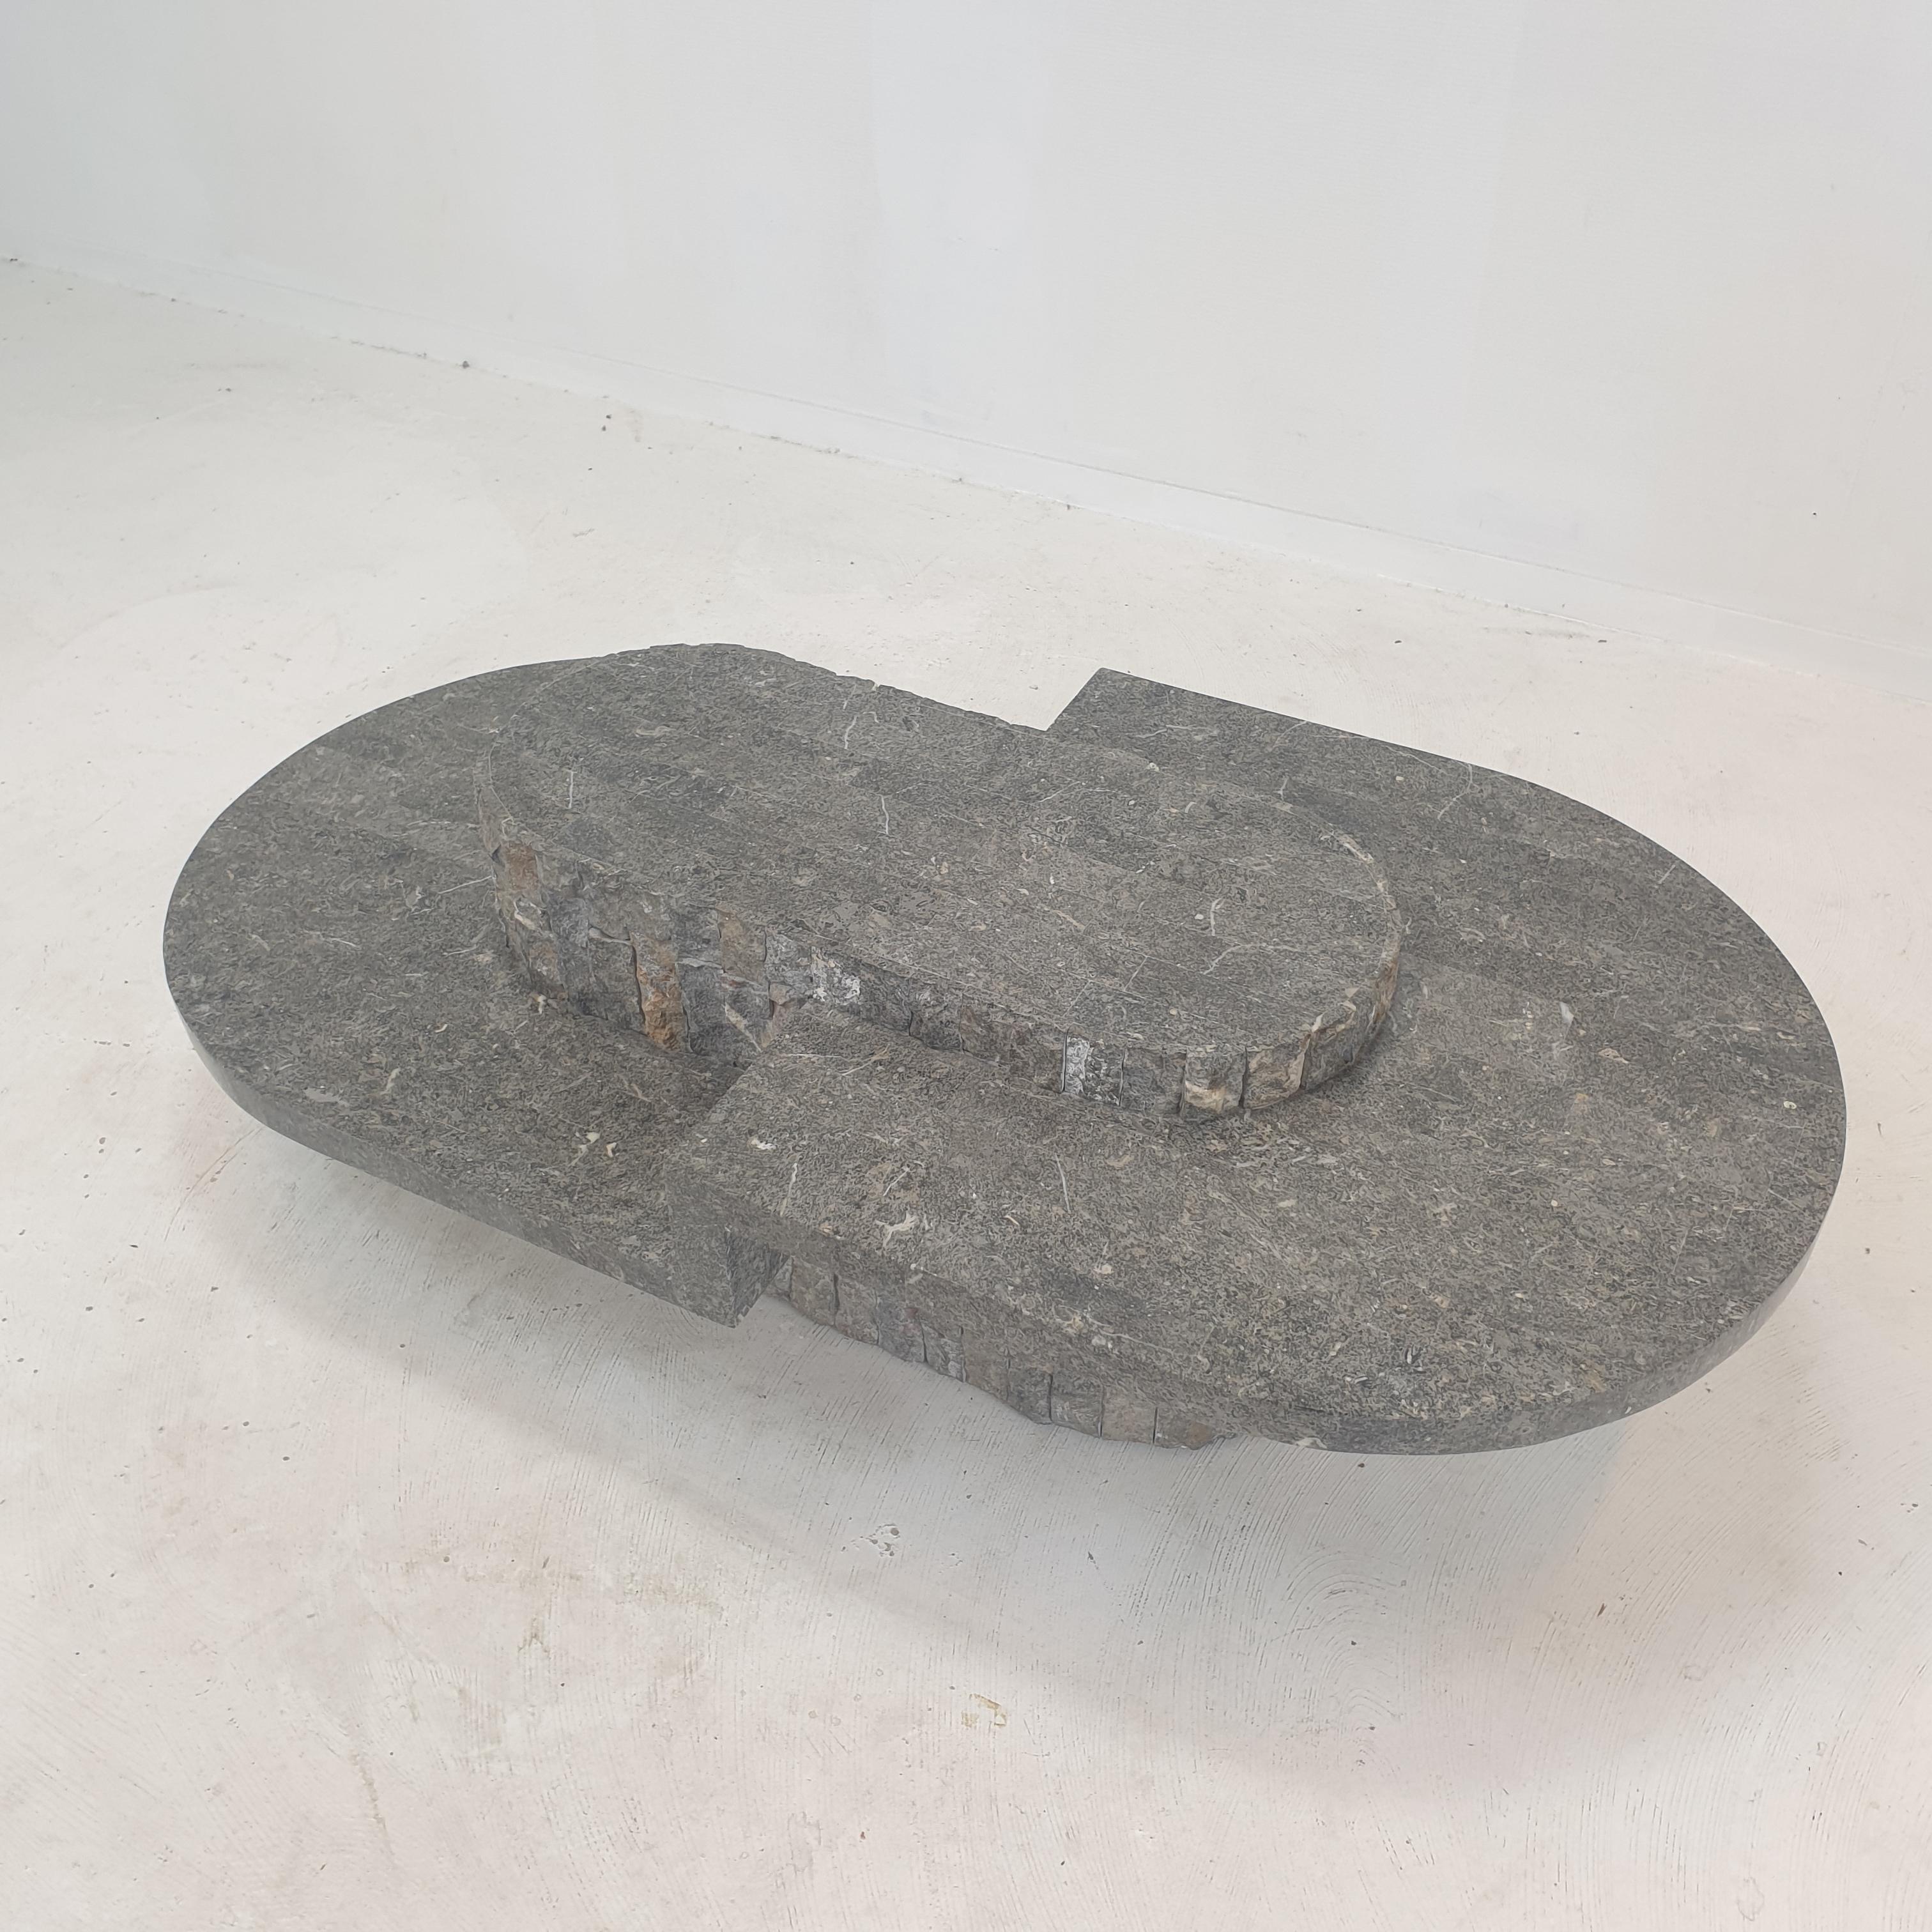 Magnussen Ponte Mactan Stone or Fossil Stone Coffee Table, 1980s For Sale 1